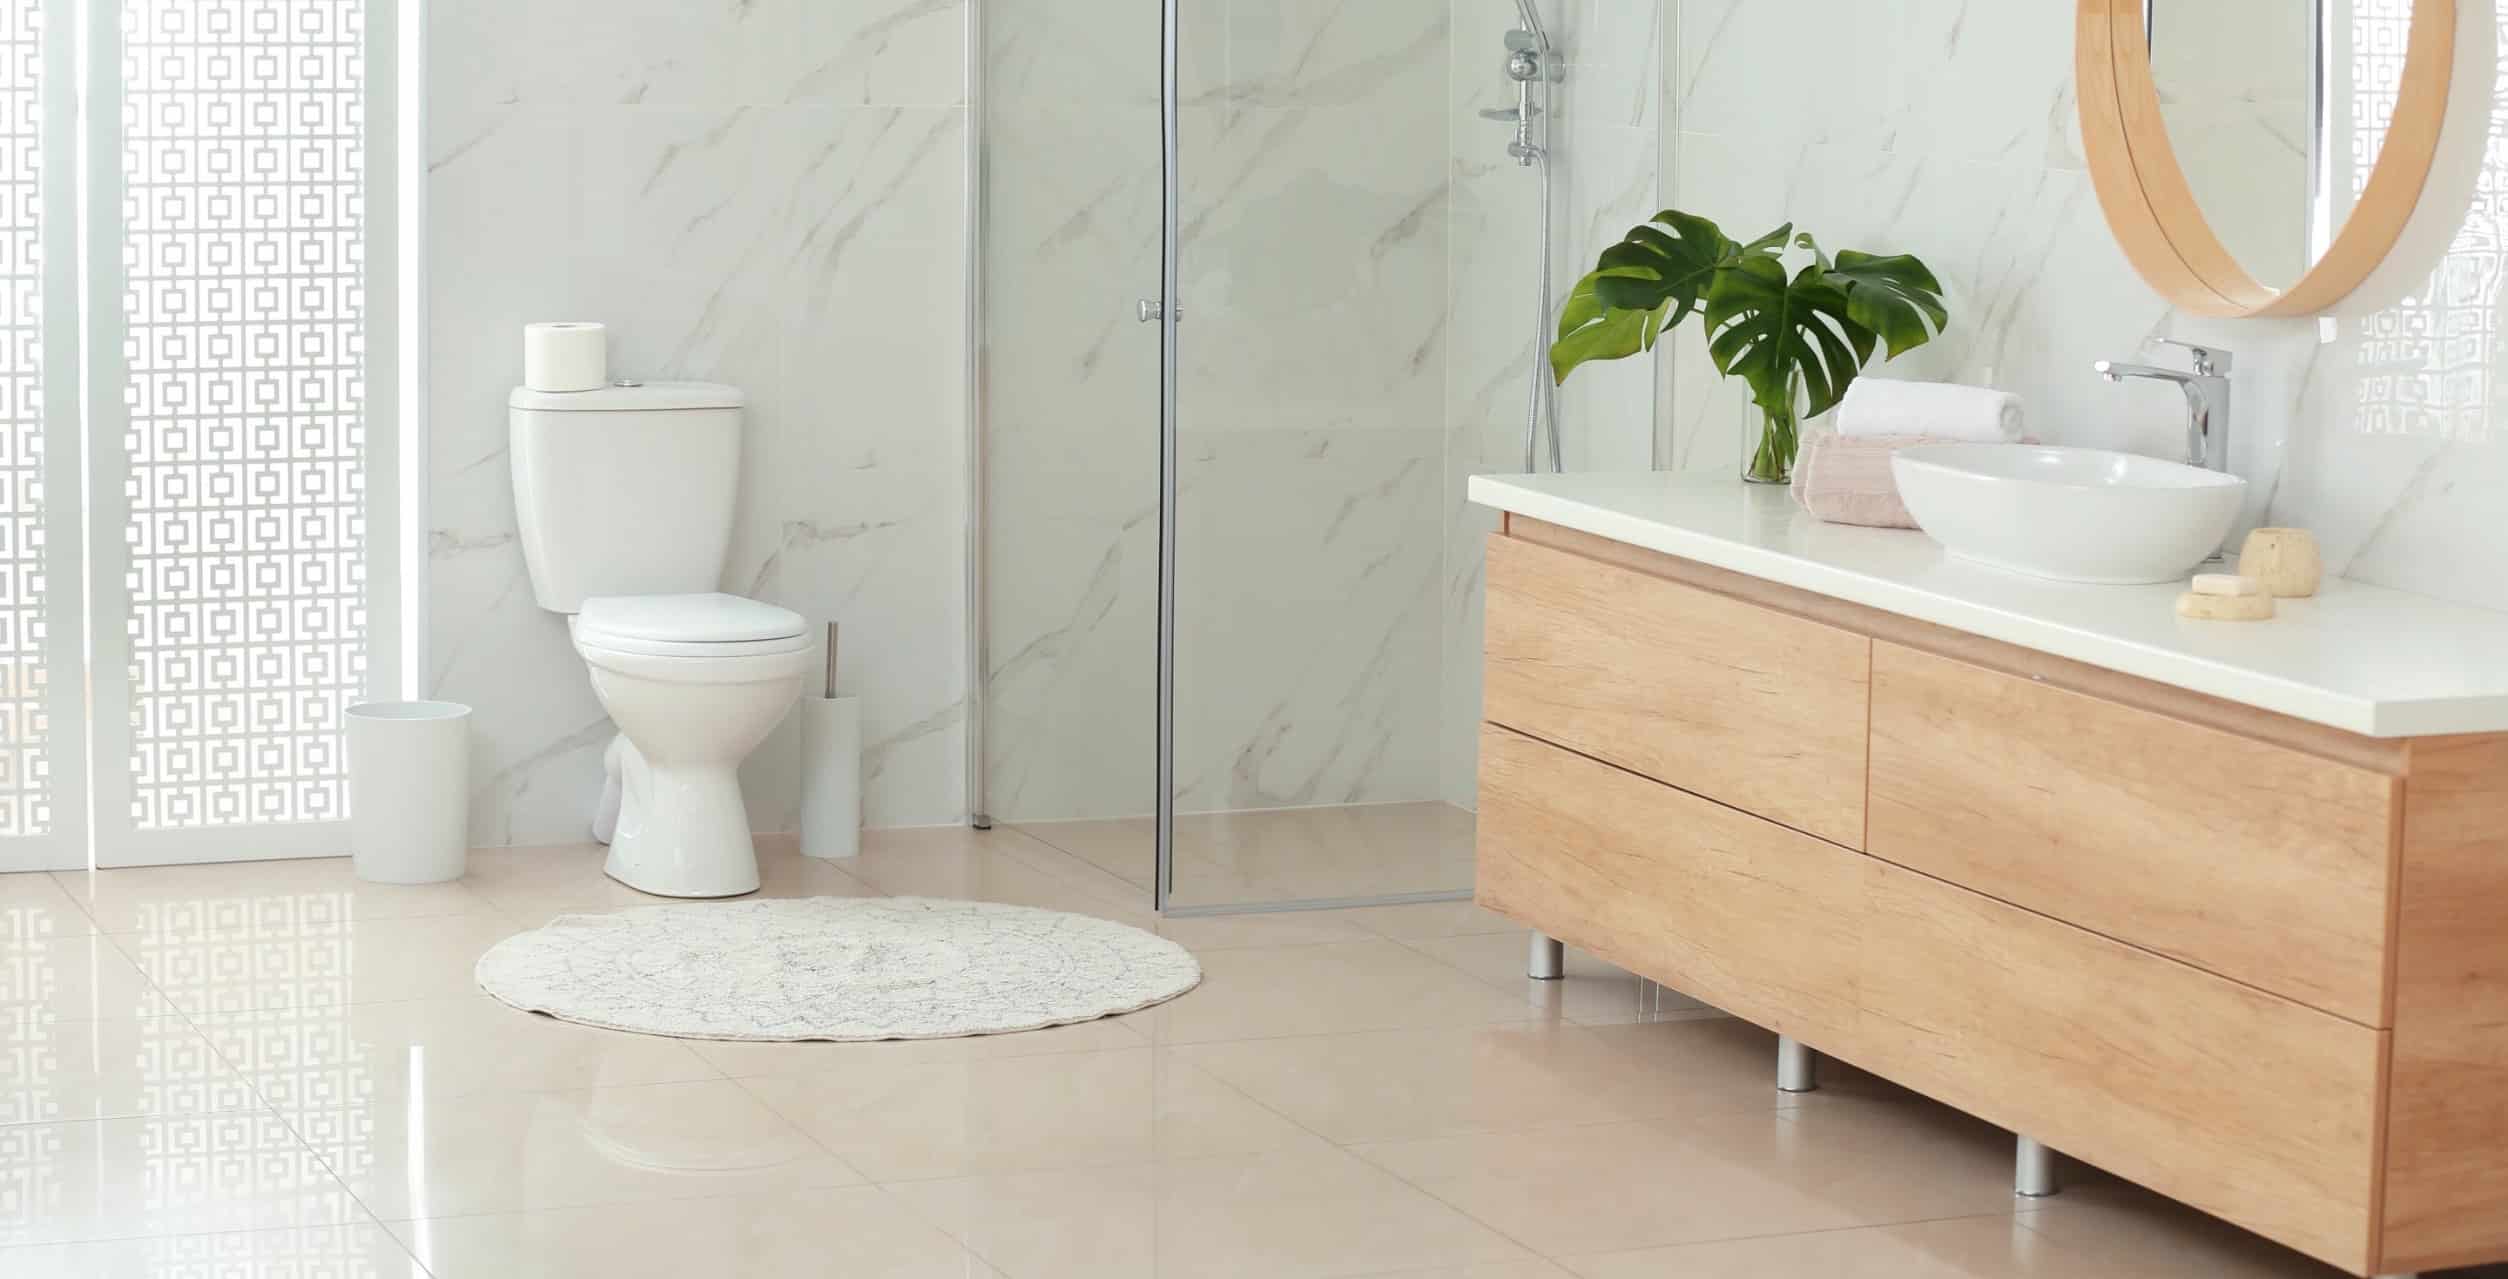 Interior of modern bathroom with toilet bowl